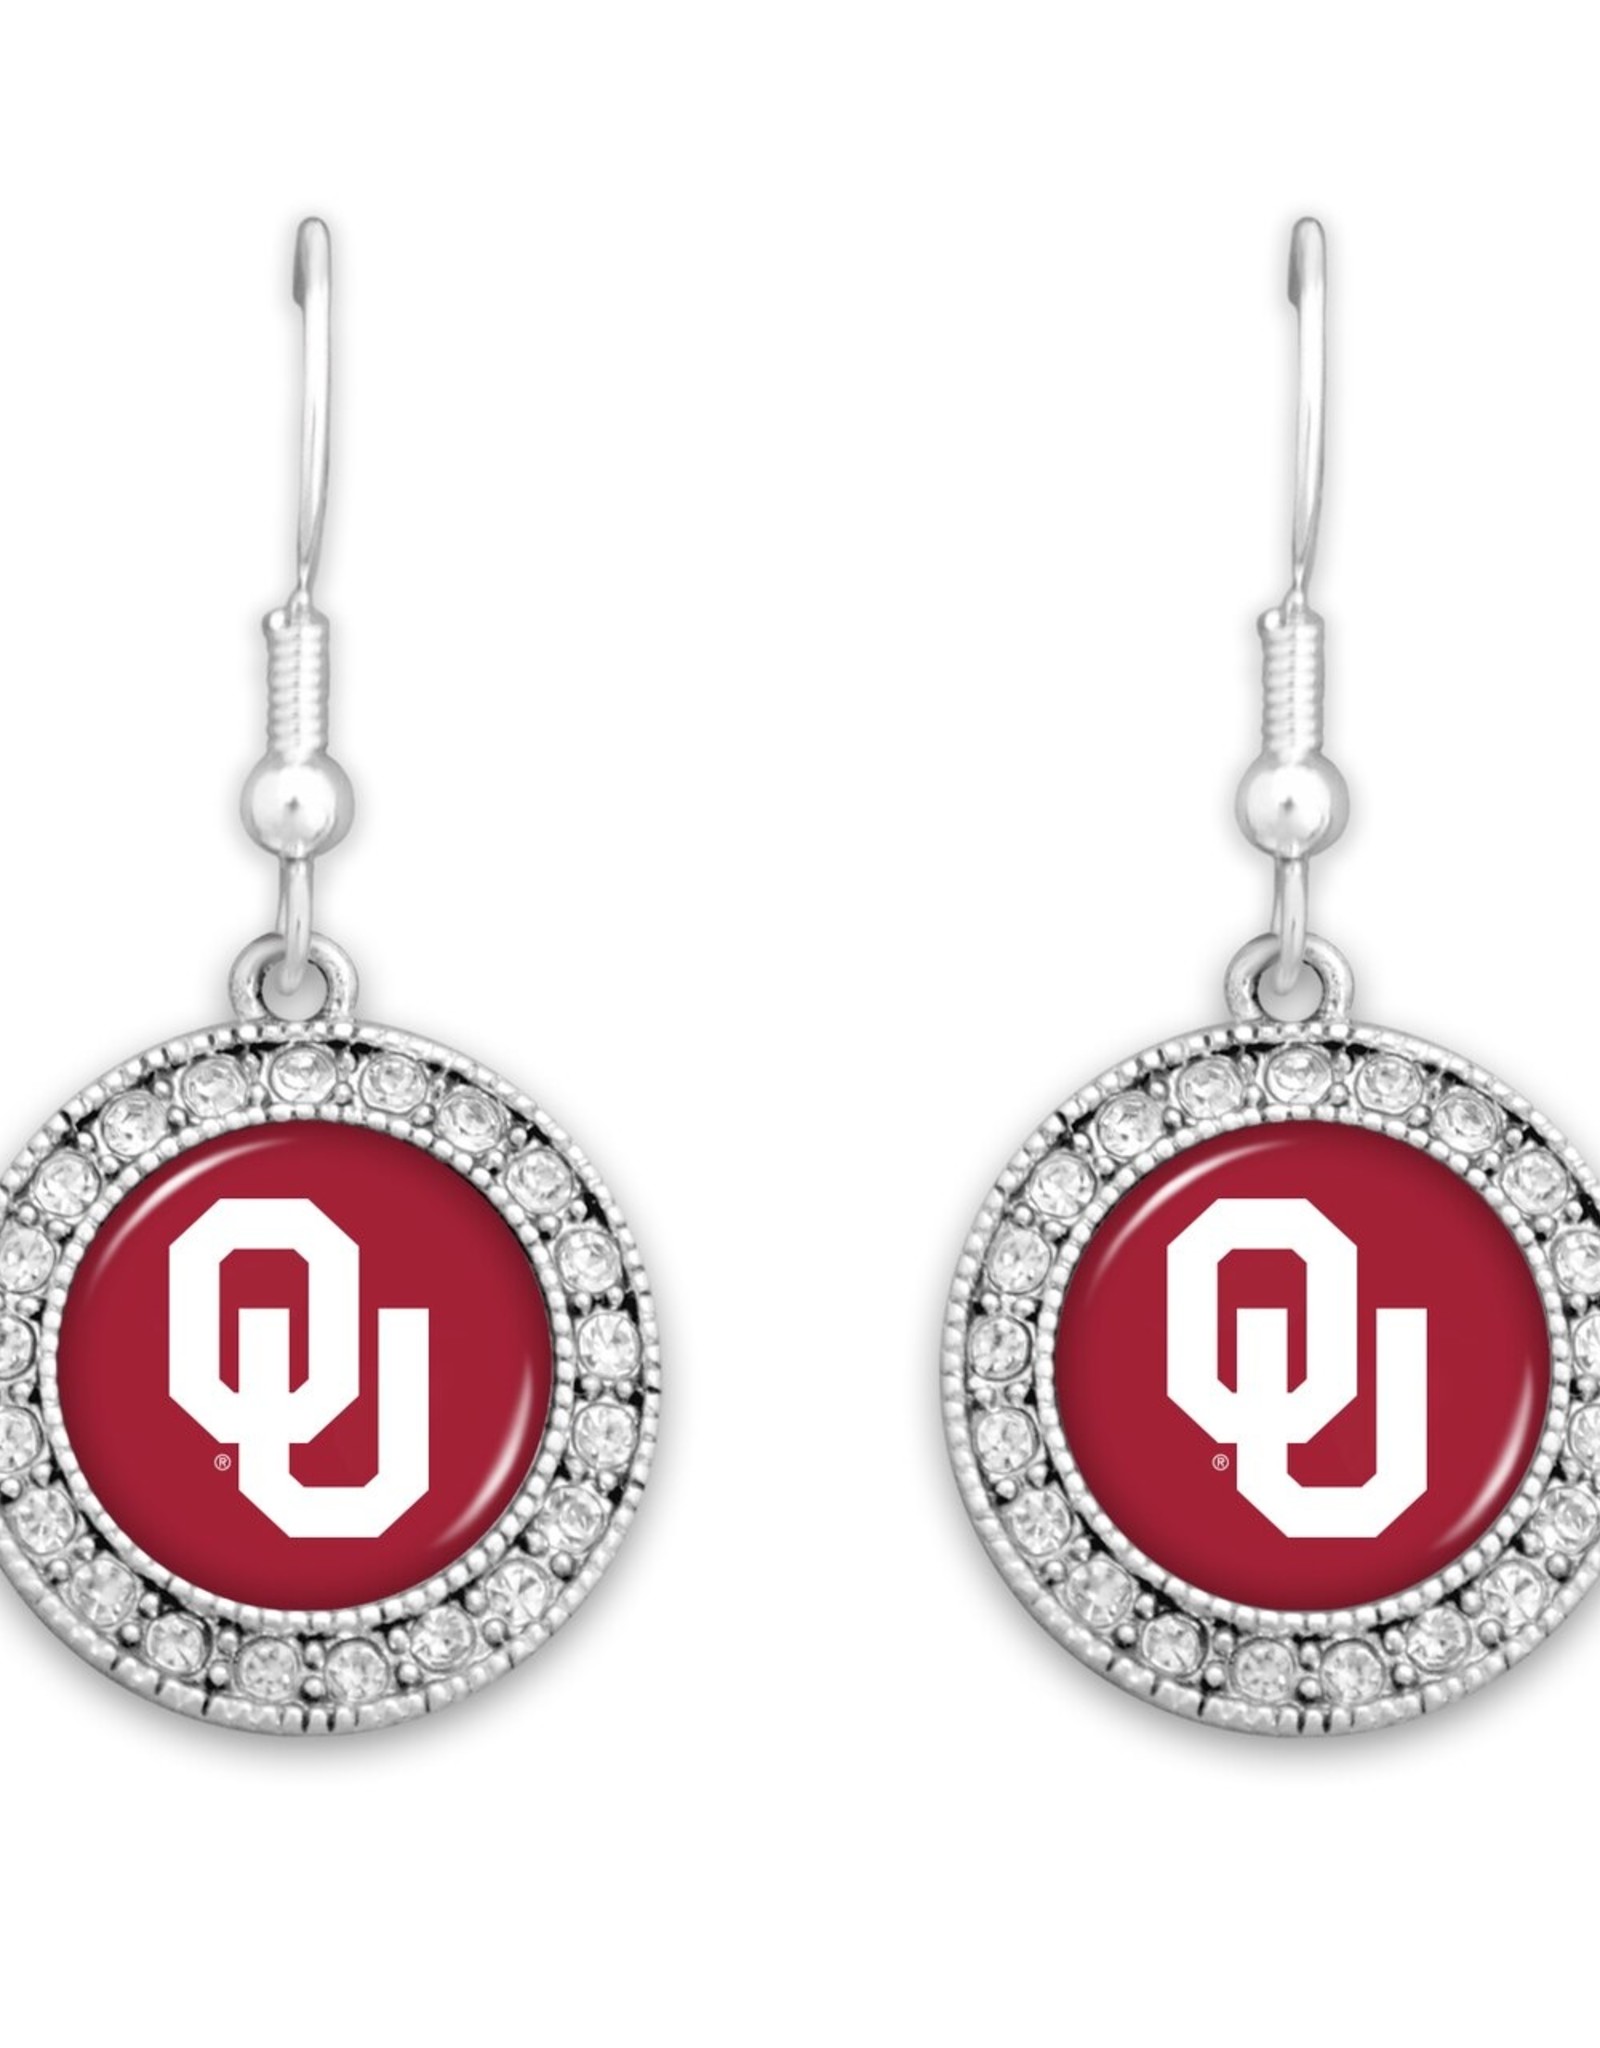 FTH OU Crystal Round Earrings - Balfour of Norman